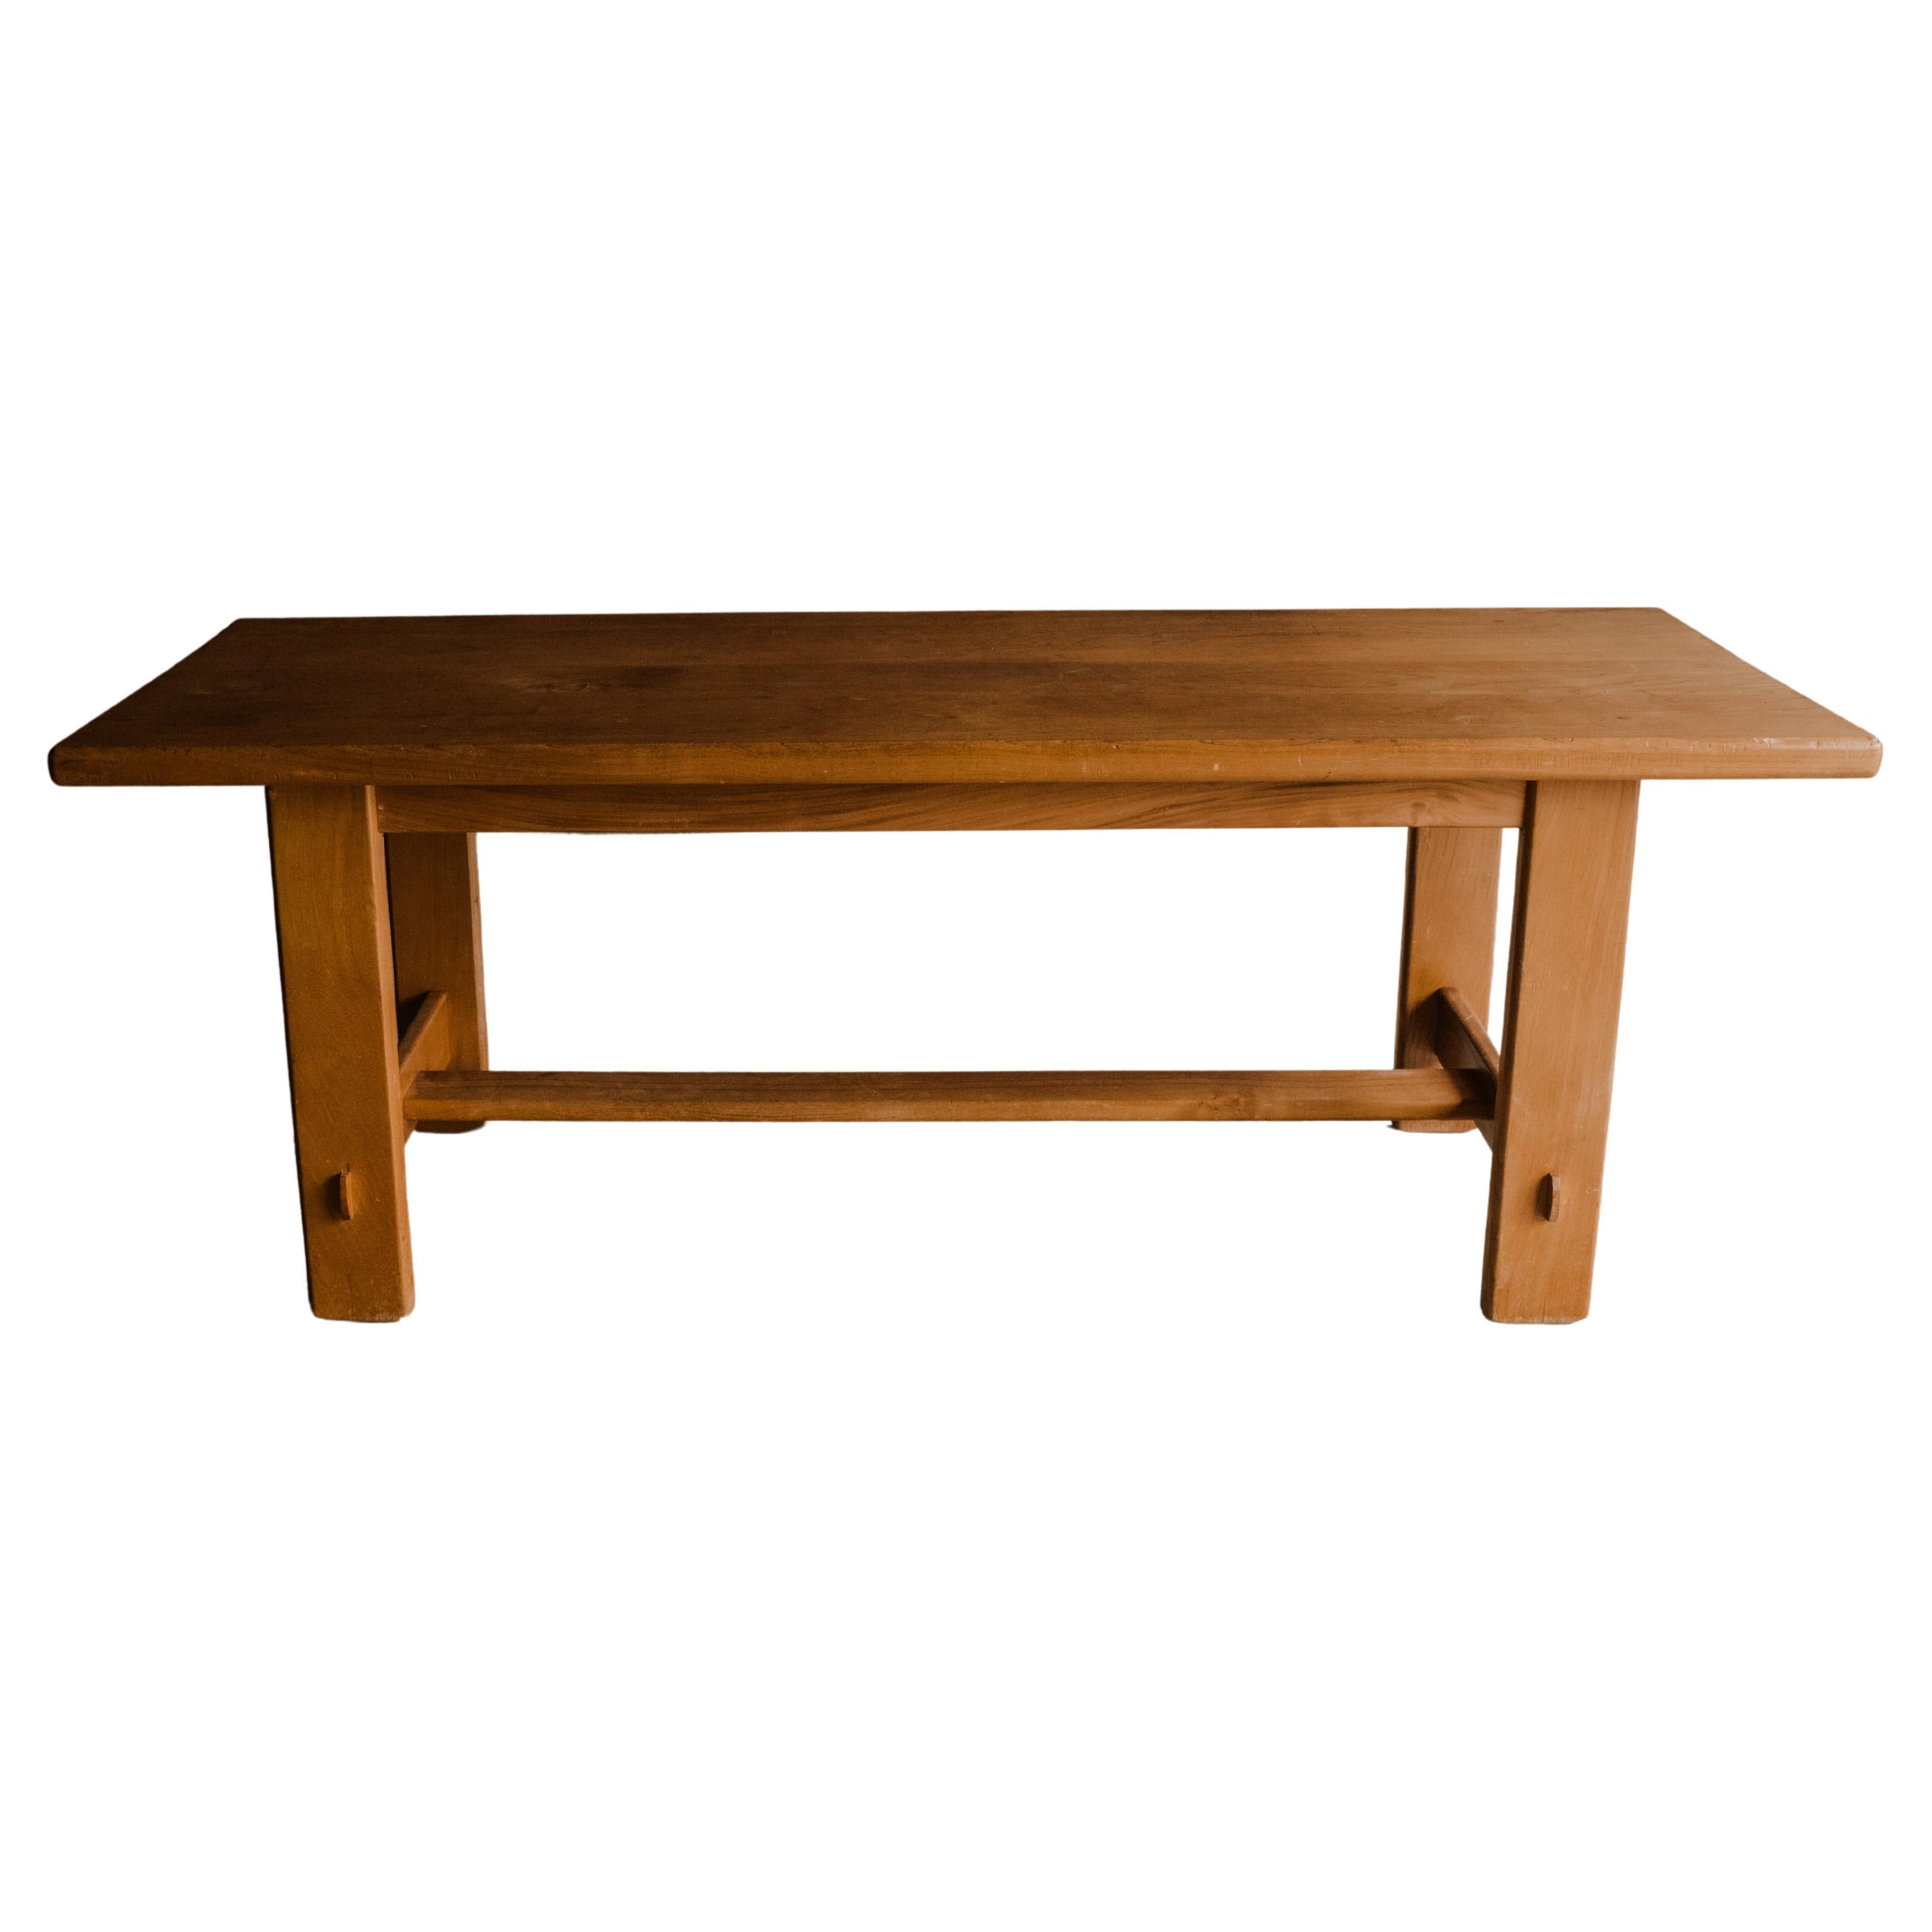 Vintage Elm Dining Table from France, Circa 1960